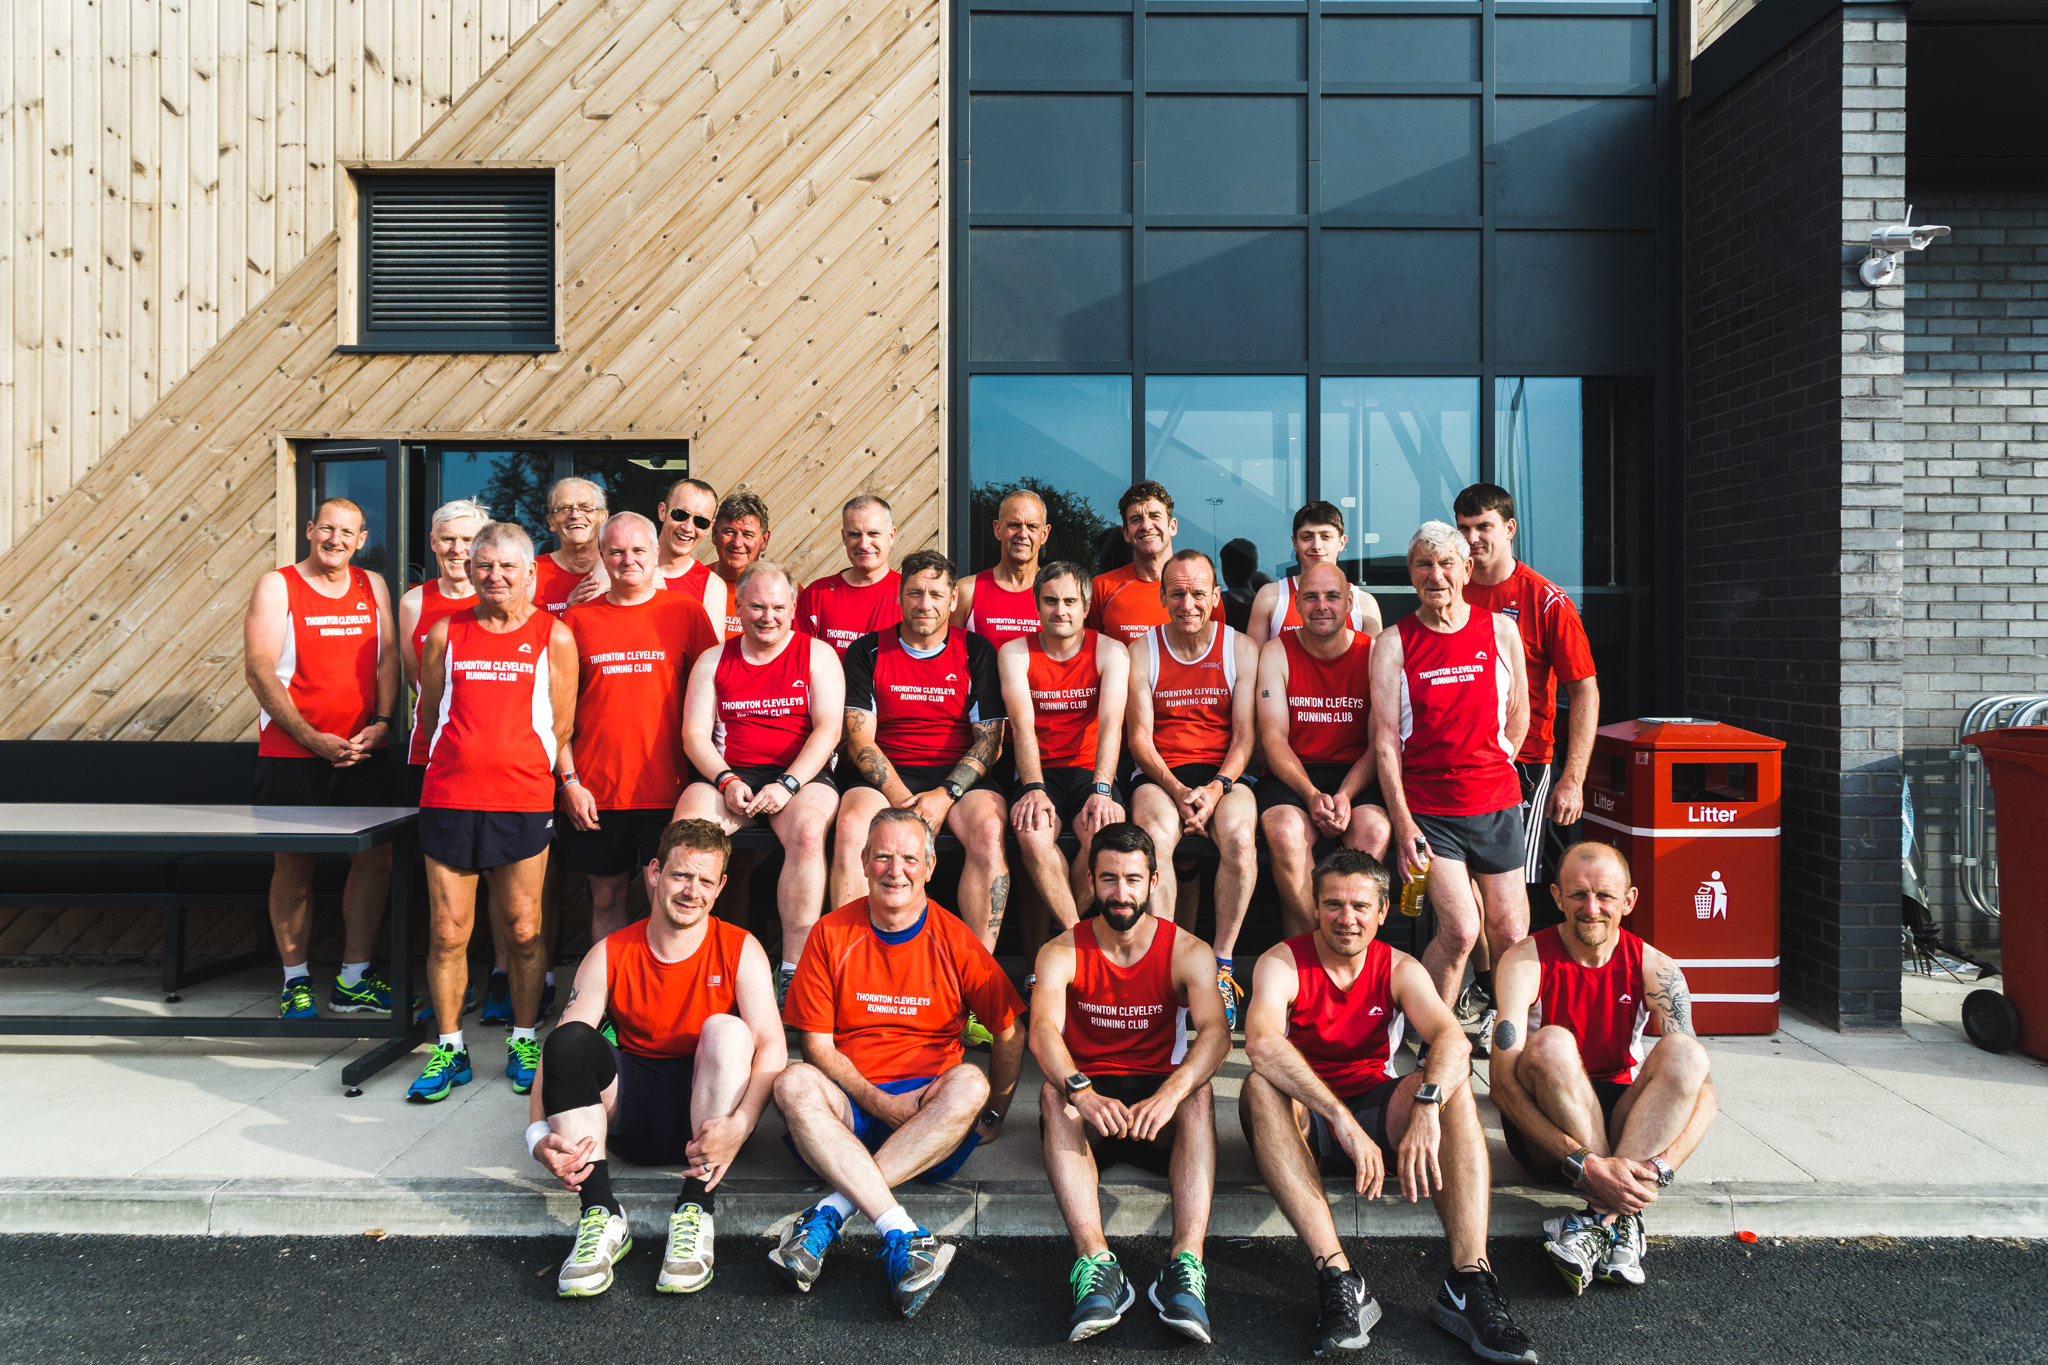 16-06-07 Team photo for Cleveleys and Thornton running club-16.jpg